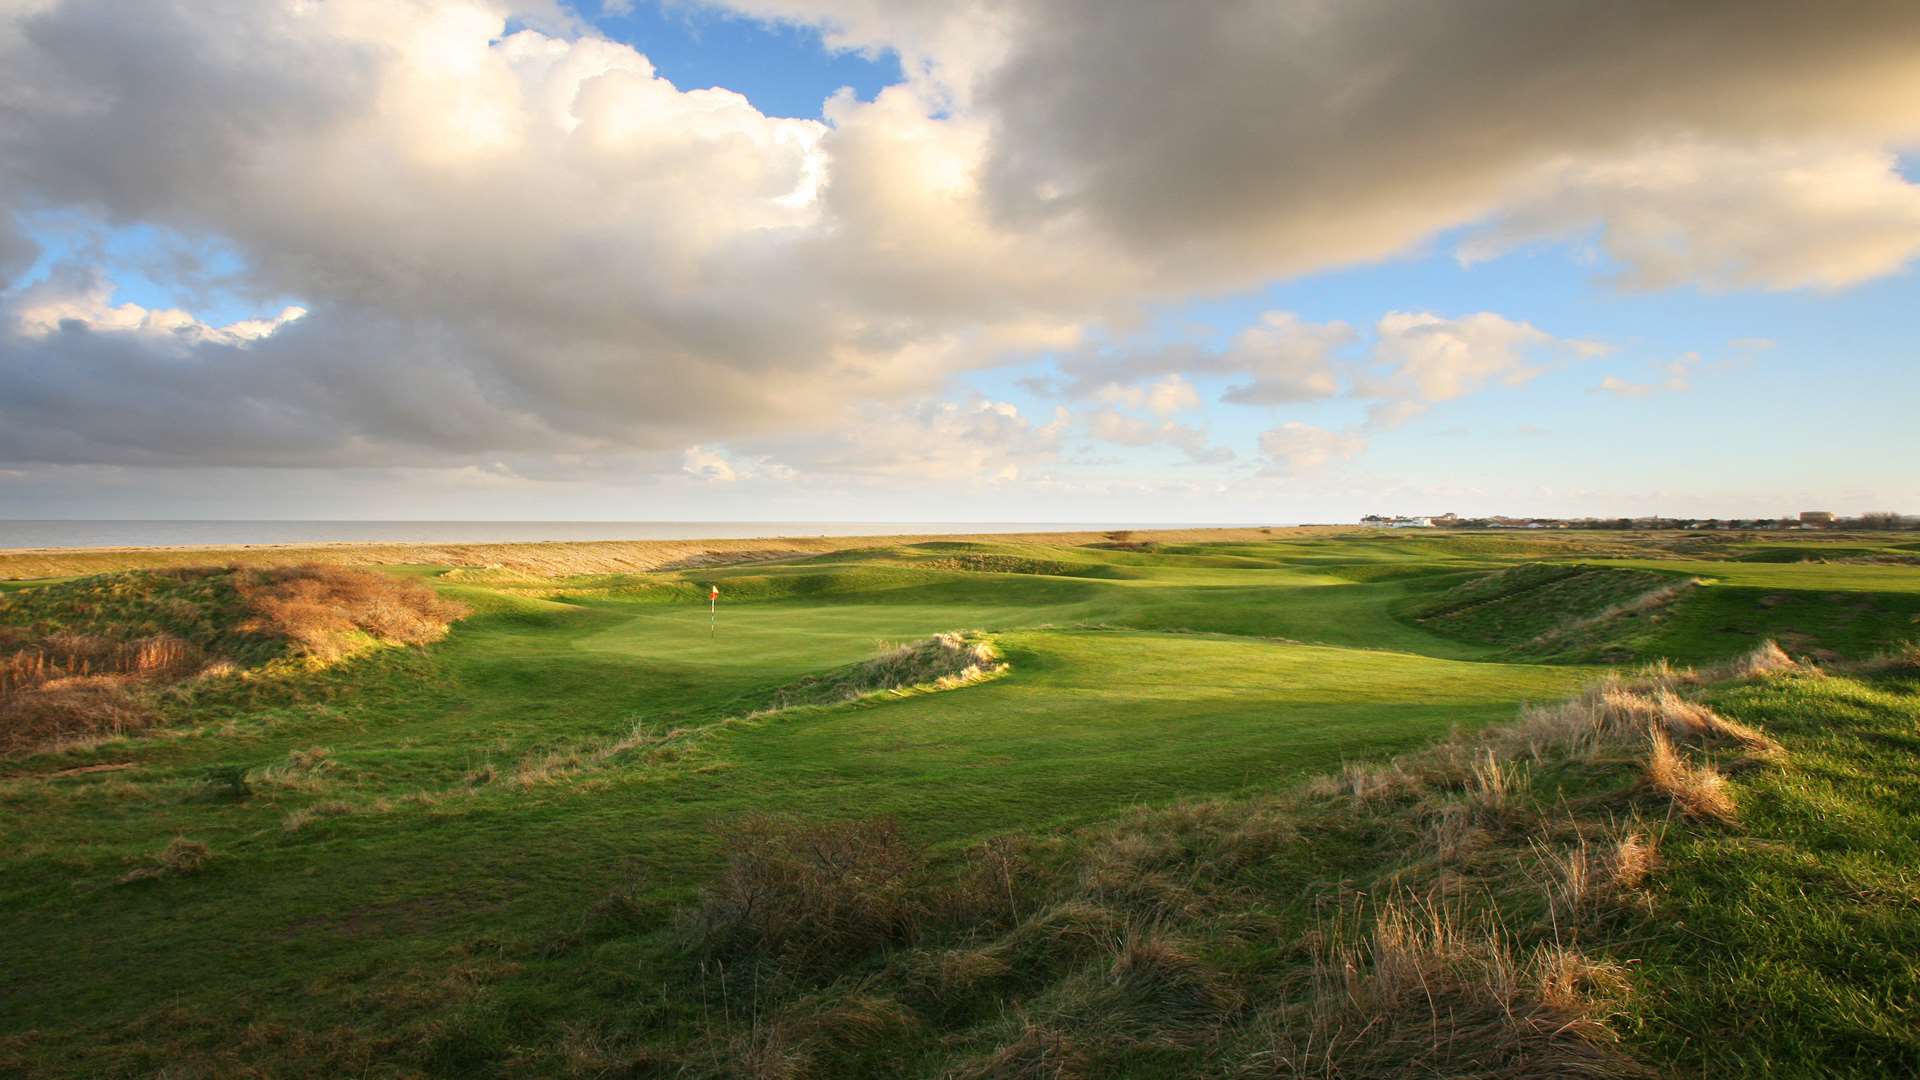 Police are appealing for information after damage to the fairway at Royal Cinque Ports Golf Club in Deal.